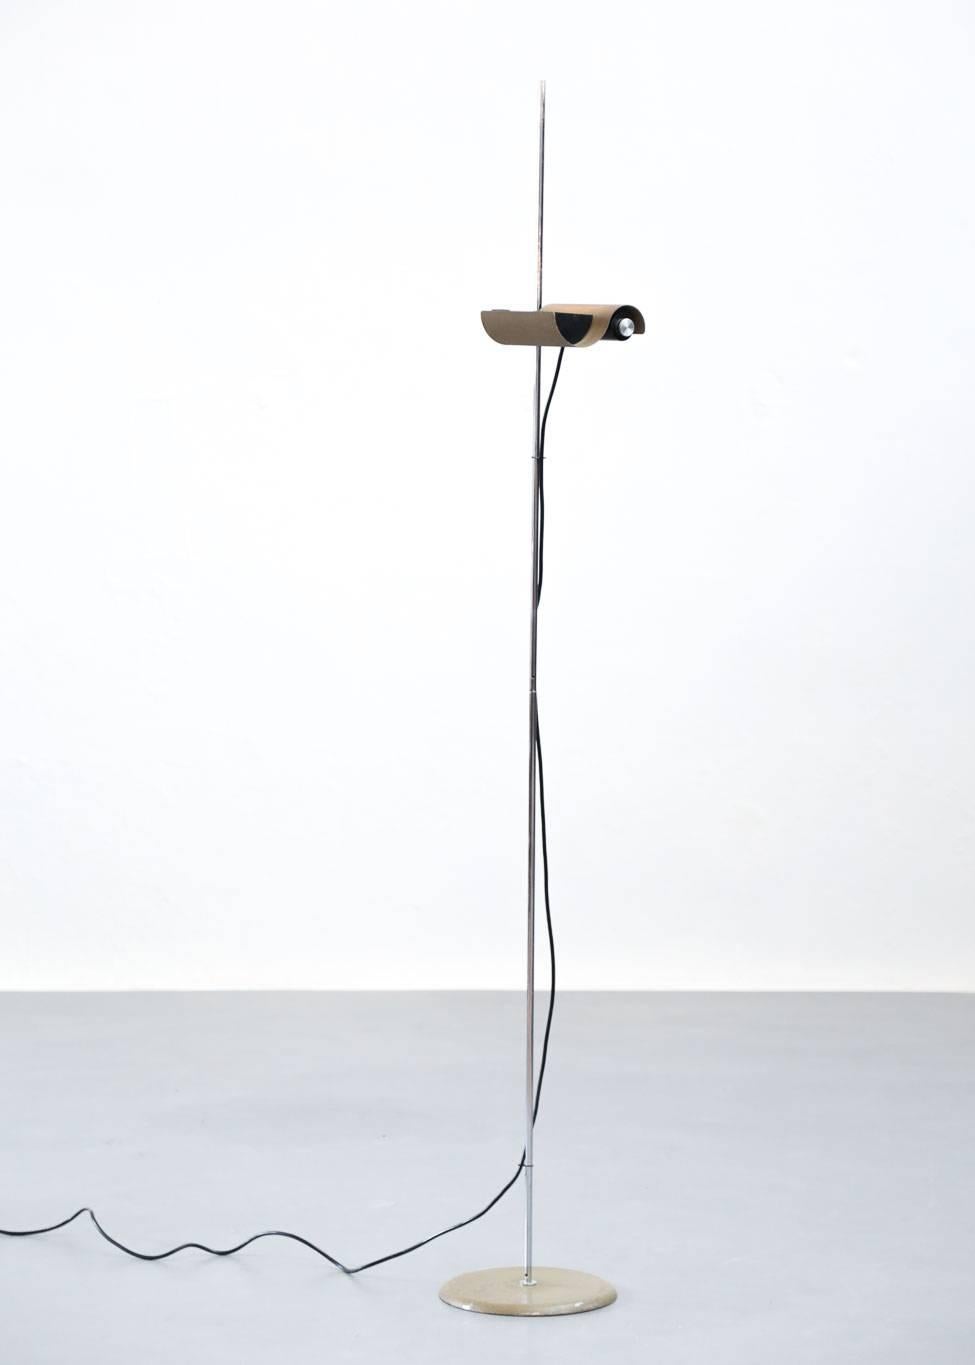 Floor lamp designed by Italian designer Vico Magistretti in 1970s for Oluce.
Composed of a central rod in chrome-plated metal, a base in lacquered metal, an adjustable halogen receptacle adjustable in height along the rod. Intensity of light